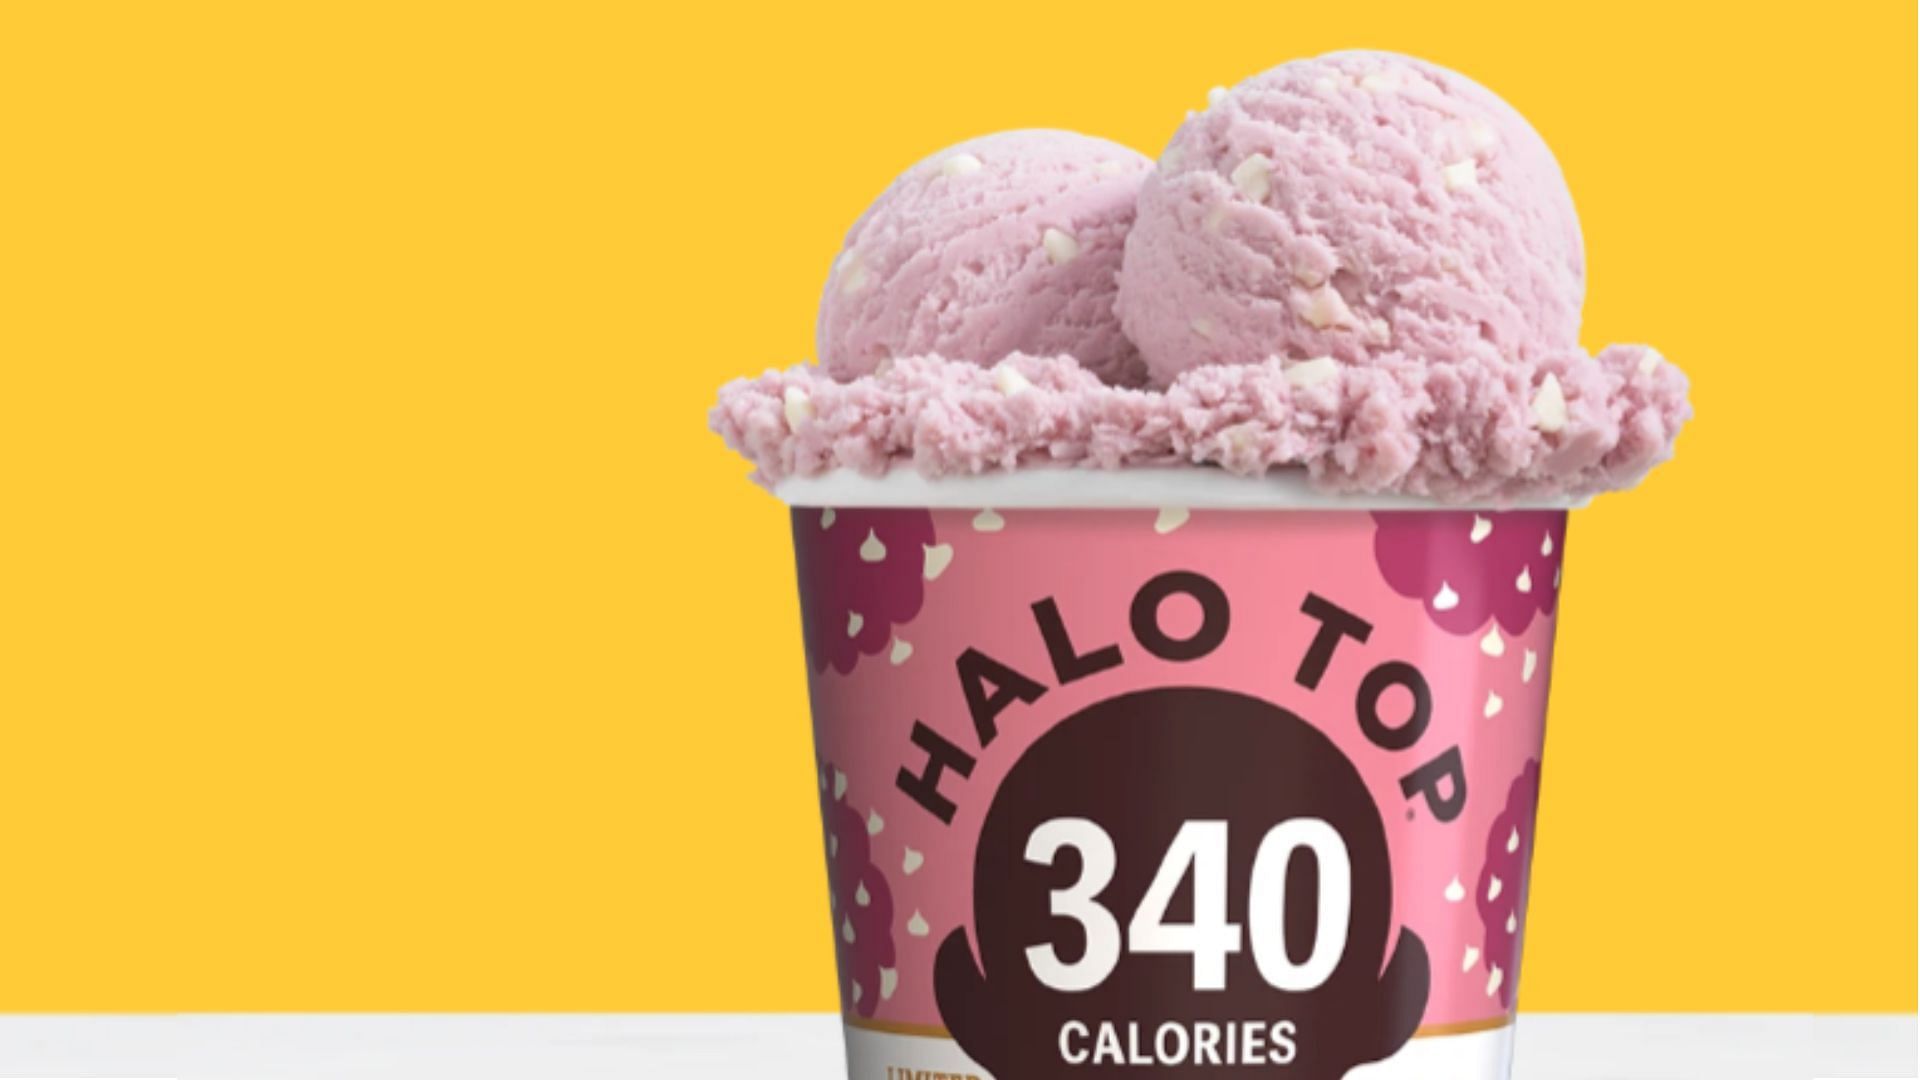 Raspberry White Chip ice cream is loaded with crunchy white chocolate chips (Image via Halo Top Creamery)